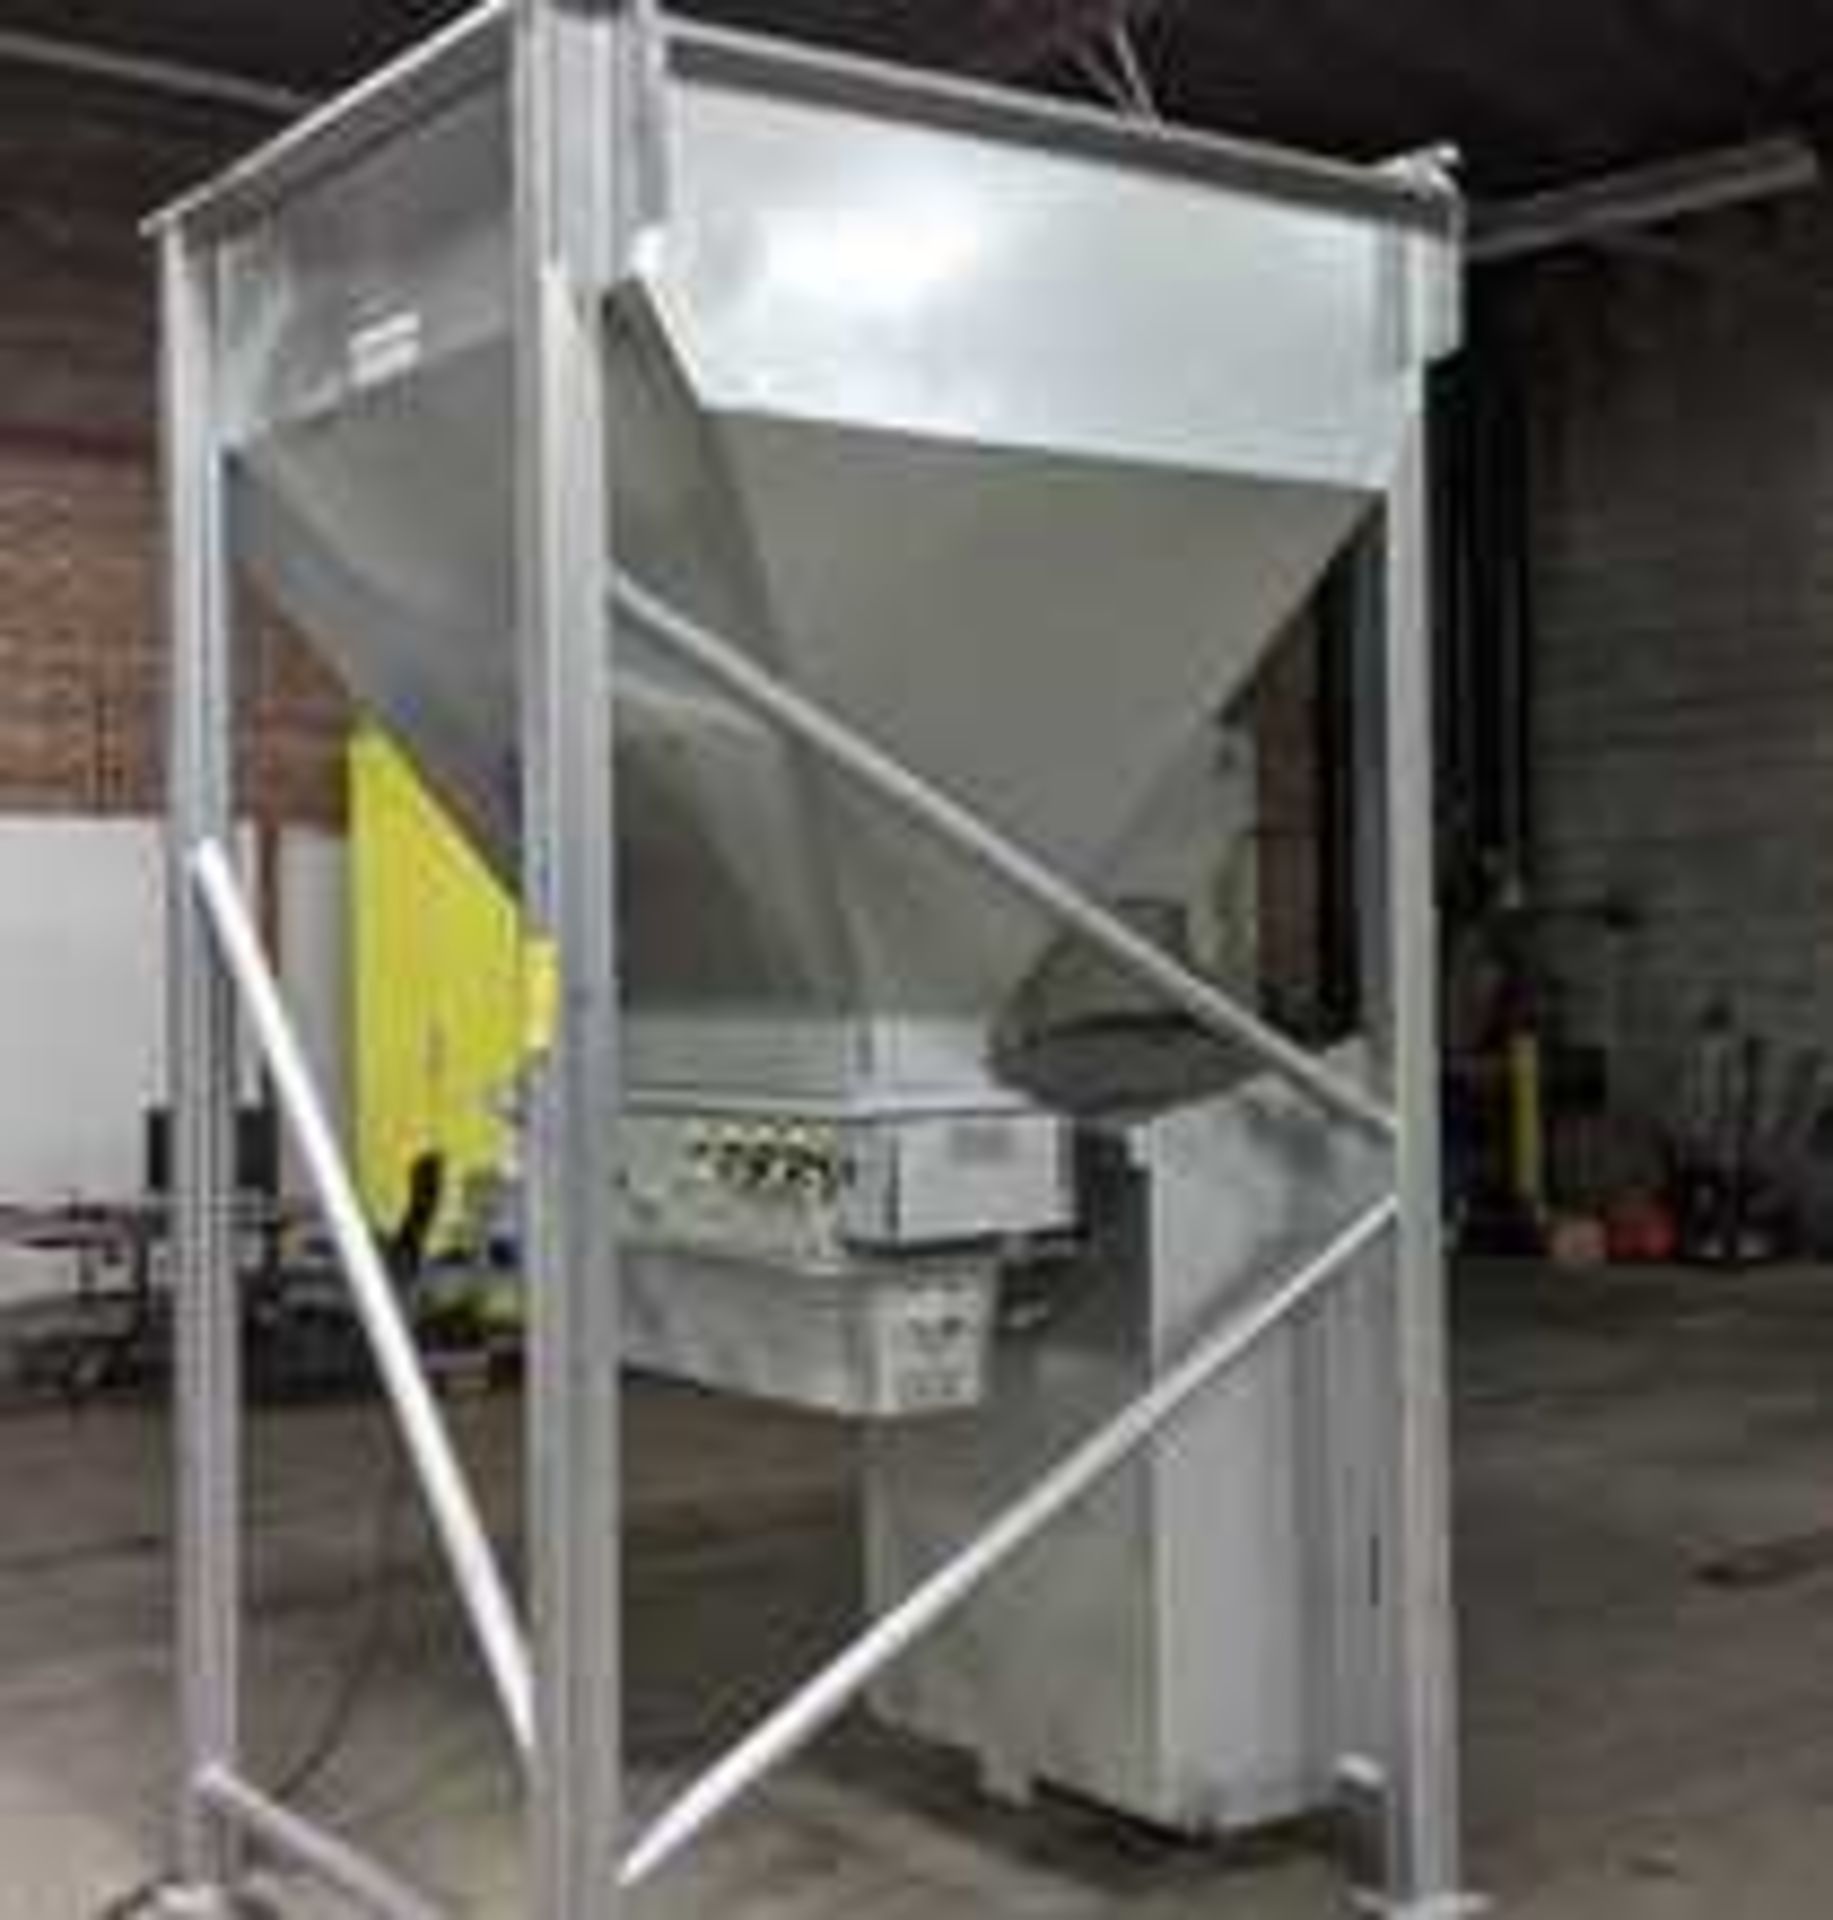 Located Wallingford, CT -- 6'W x 6'L Stainless Steel Hopper with Force Feeder